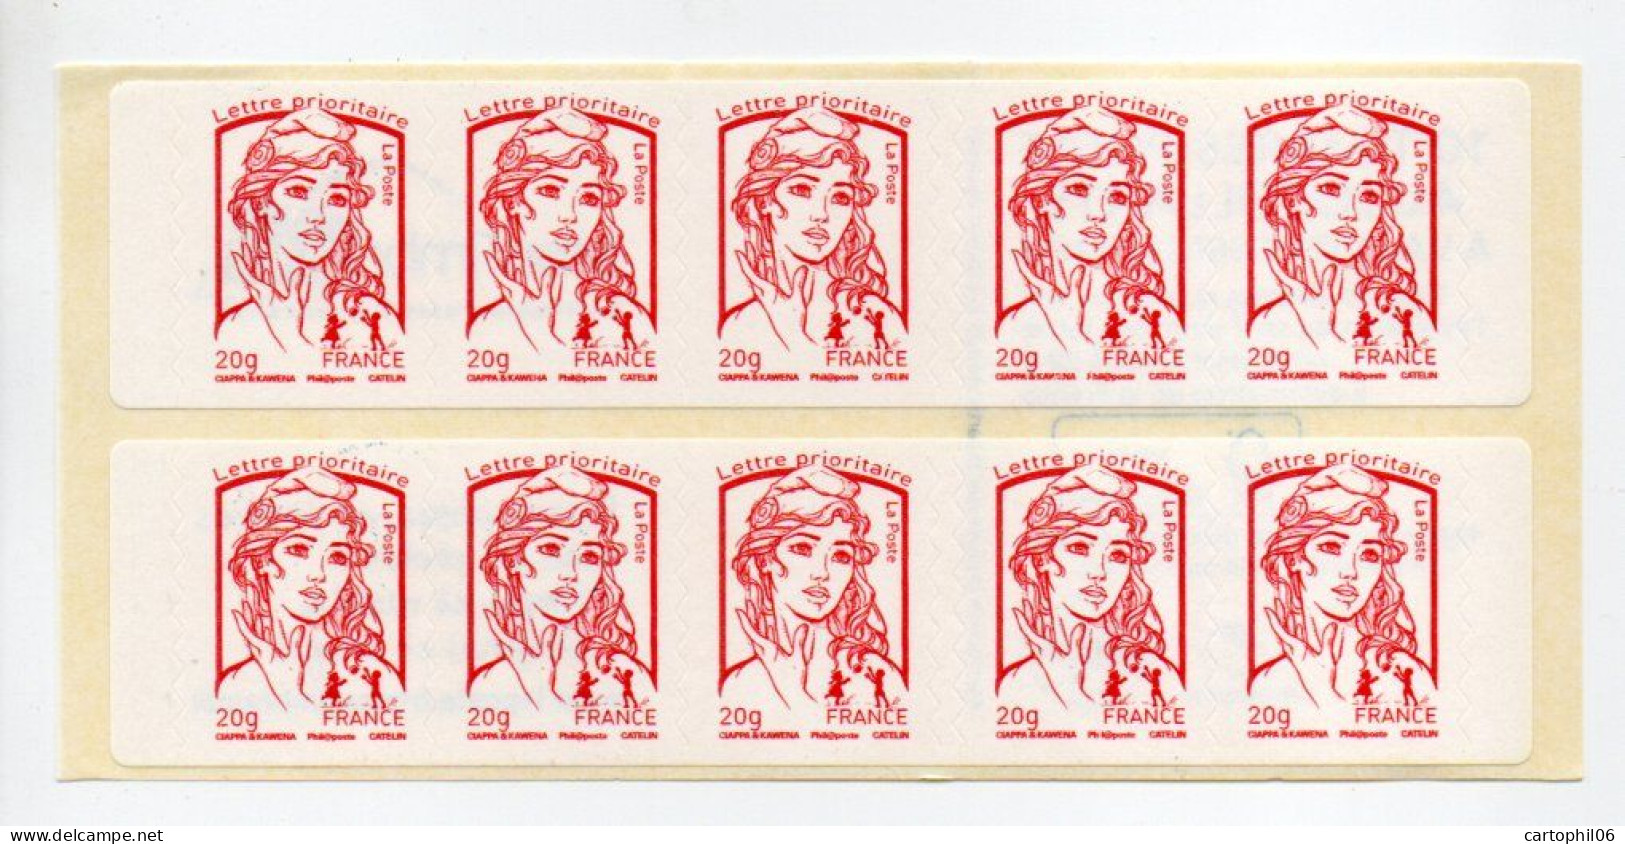 - FRANCE Carnet 10 Timbres Prioritaires Marianne De Ciappa - MON TIMBRAMOI - VALEUR FACIALE 14,30 € - - Modernes : 1959-...